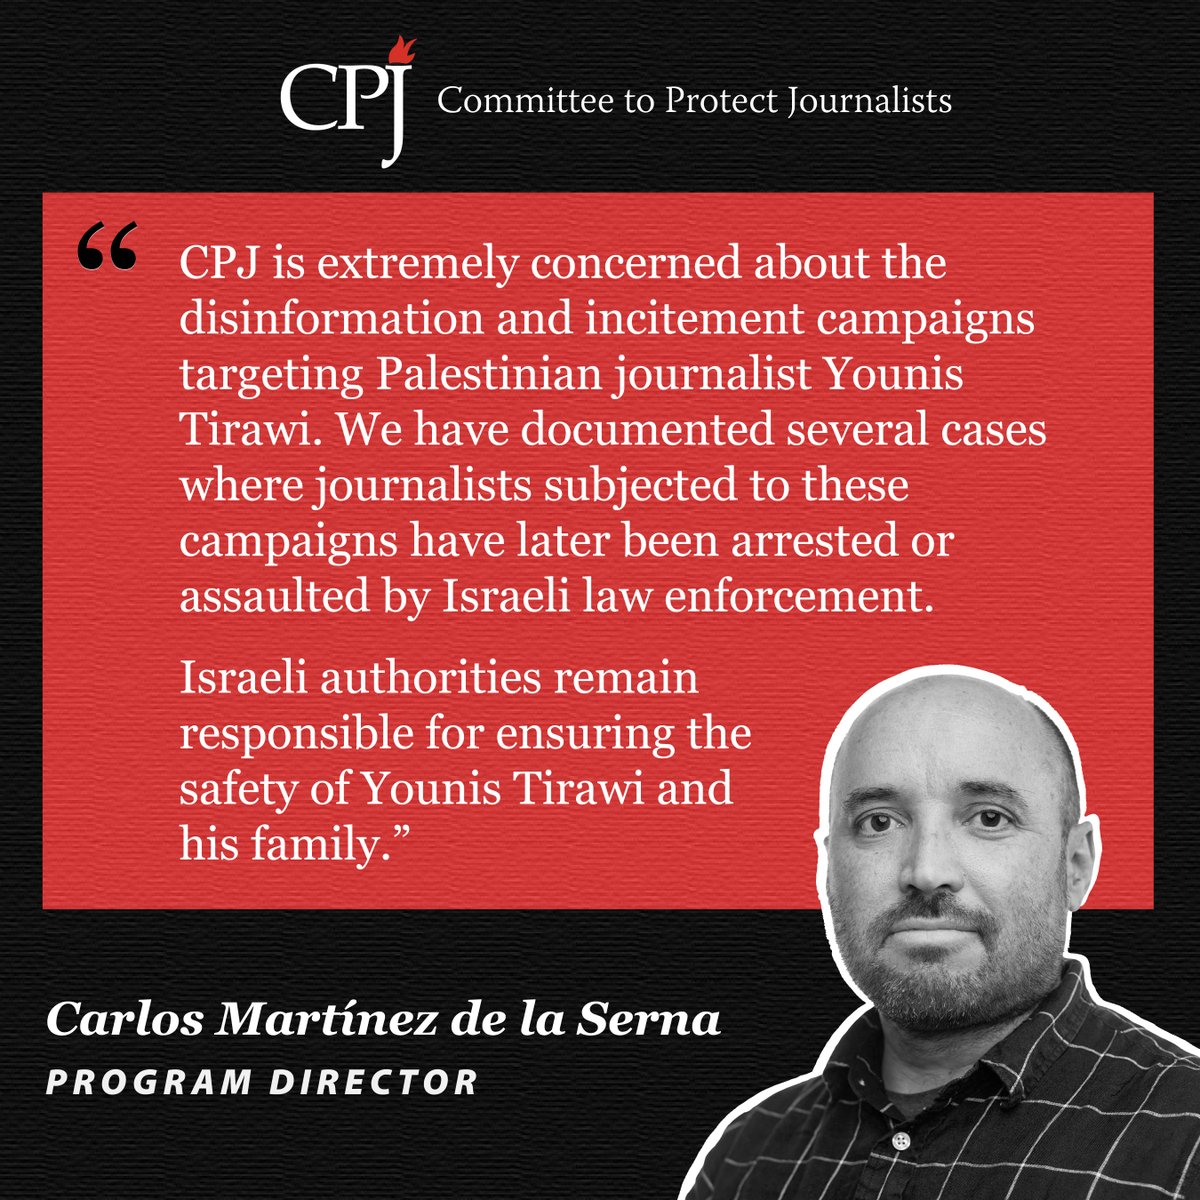 CPJ is extremely concerned about the disinformation and incitement campaigns targeting Palestinian journalist Younis Tirawi. We have documented several cases where journalists subjected to these campaigns have later been arrested or assaulted by Israeli law enforcement. Israeli